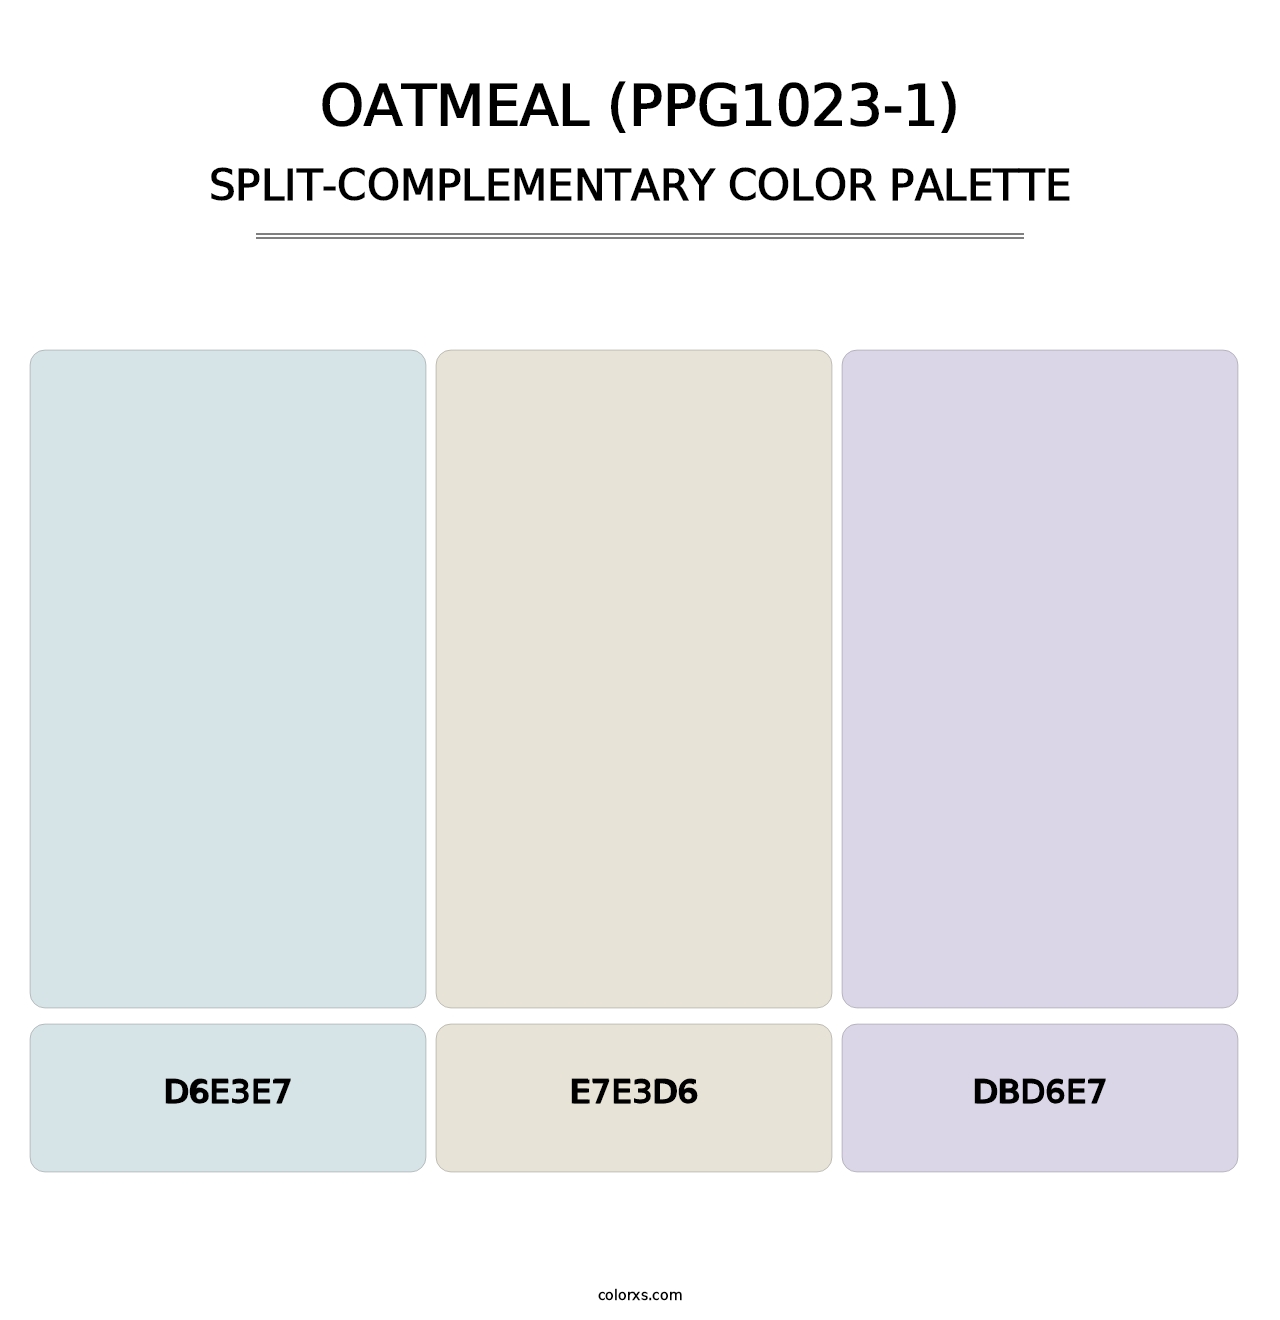 Oatmeal (PPG1023-1) - Split-Complementary Color Palette